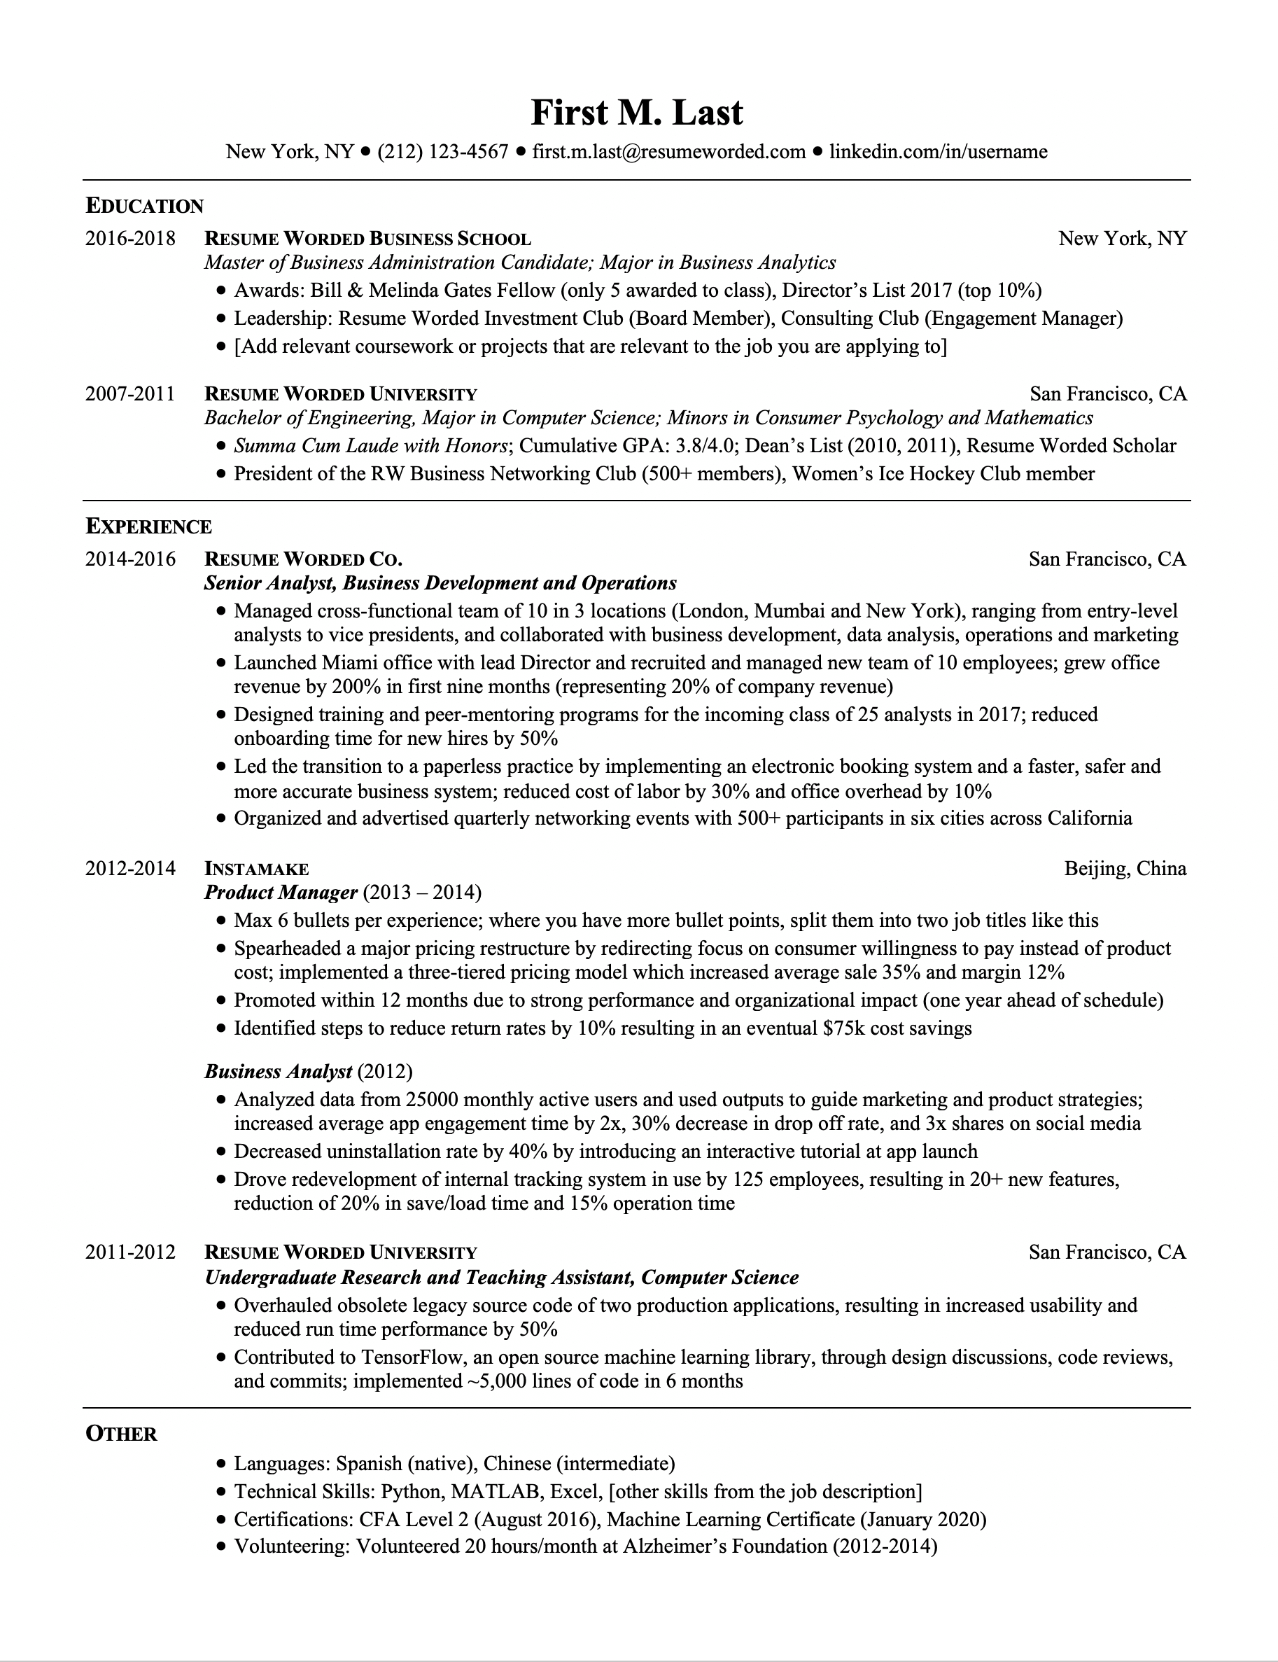 Downloadable ATS Ready Resume Templates for College Students